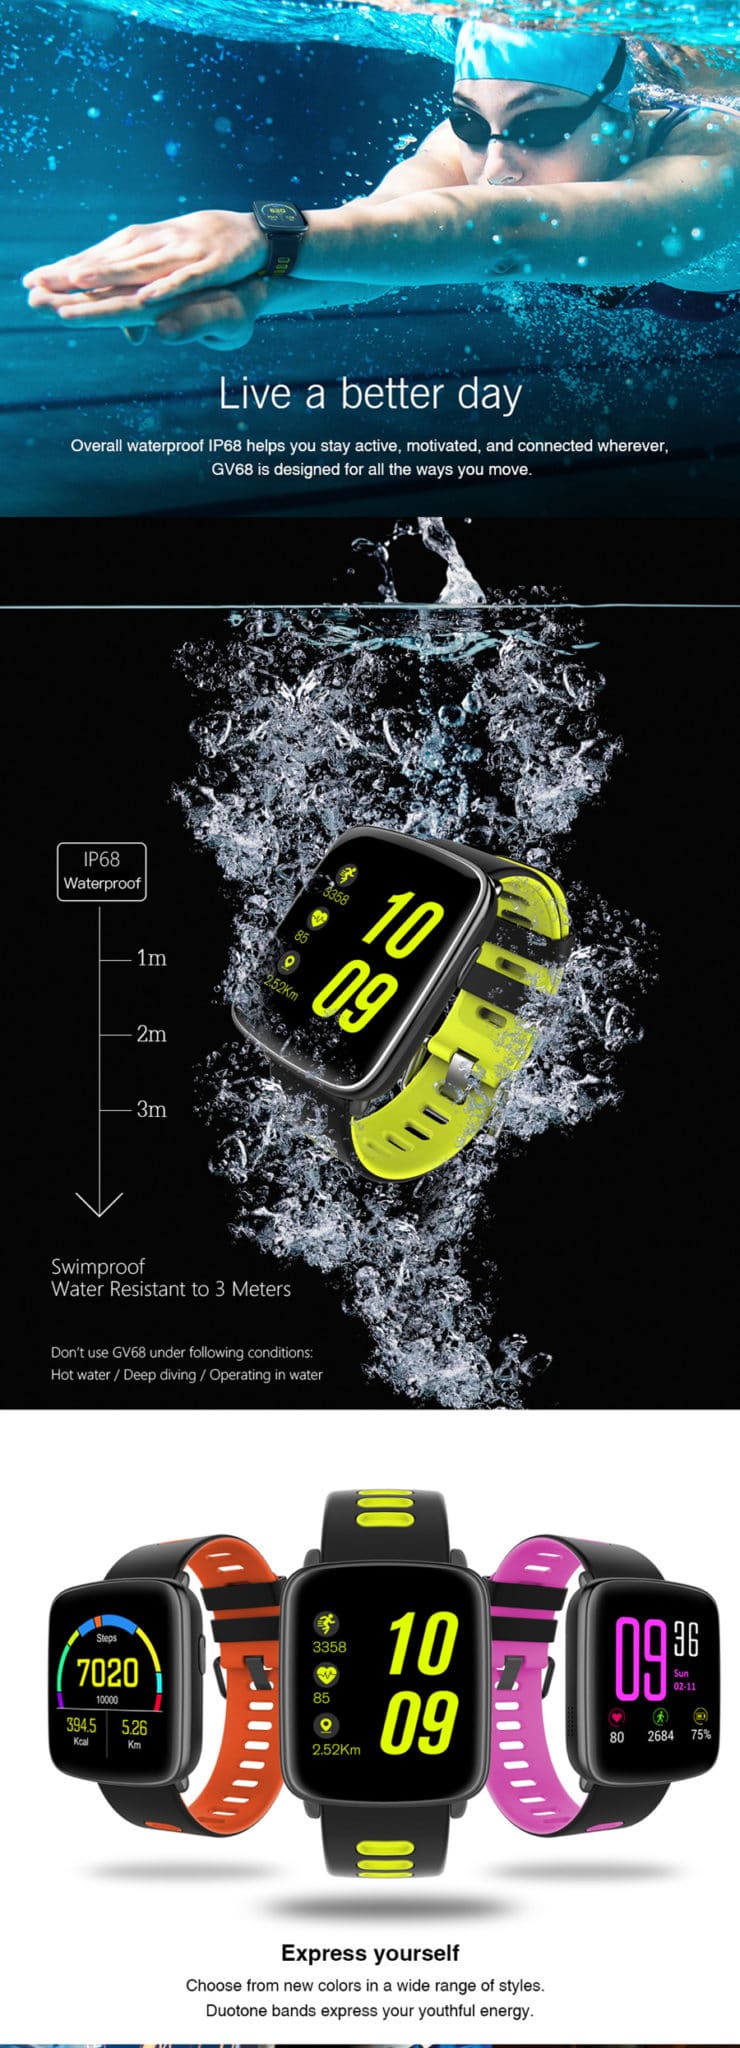 KINGWEAR GV68 MT2502D IP68 Waterproof Swim Call Heart Rate Monitor Smart Watch for IOS Android